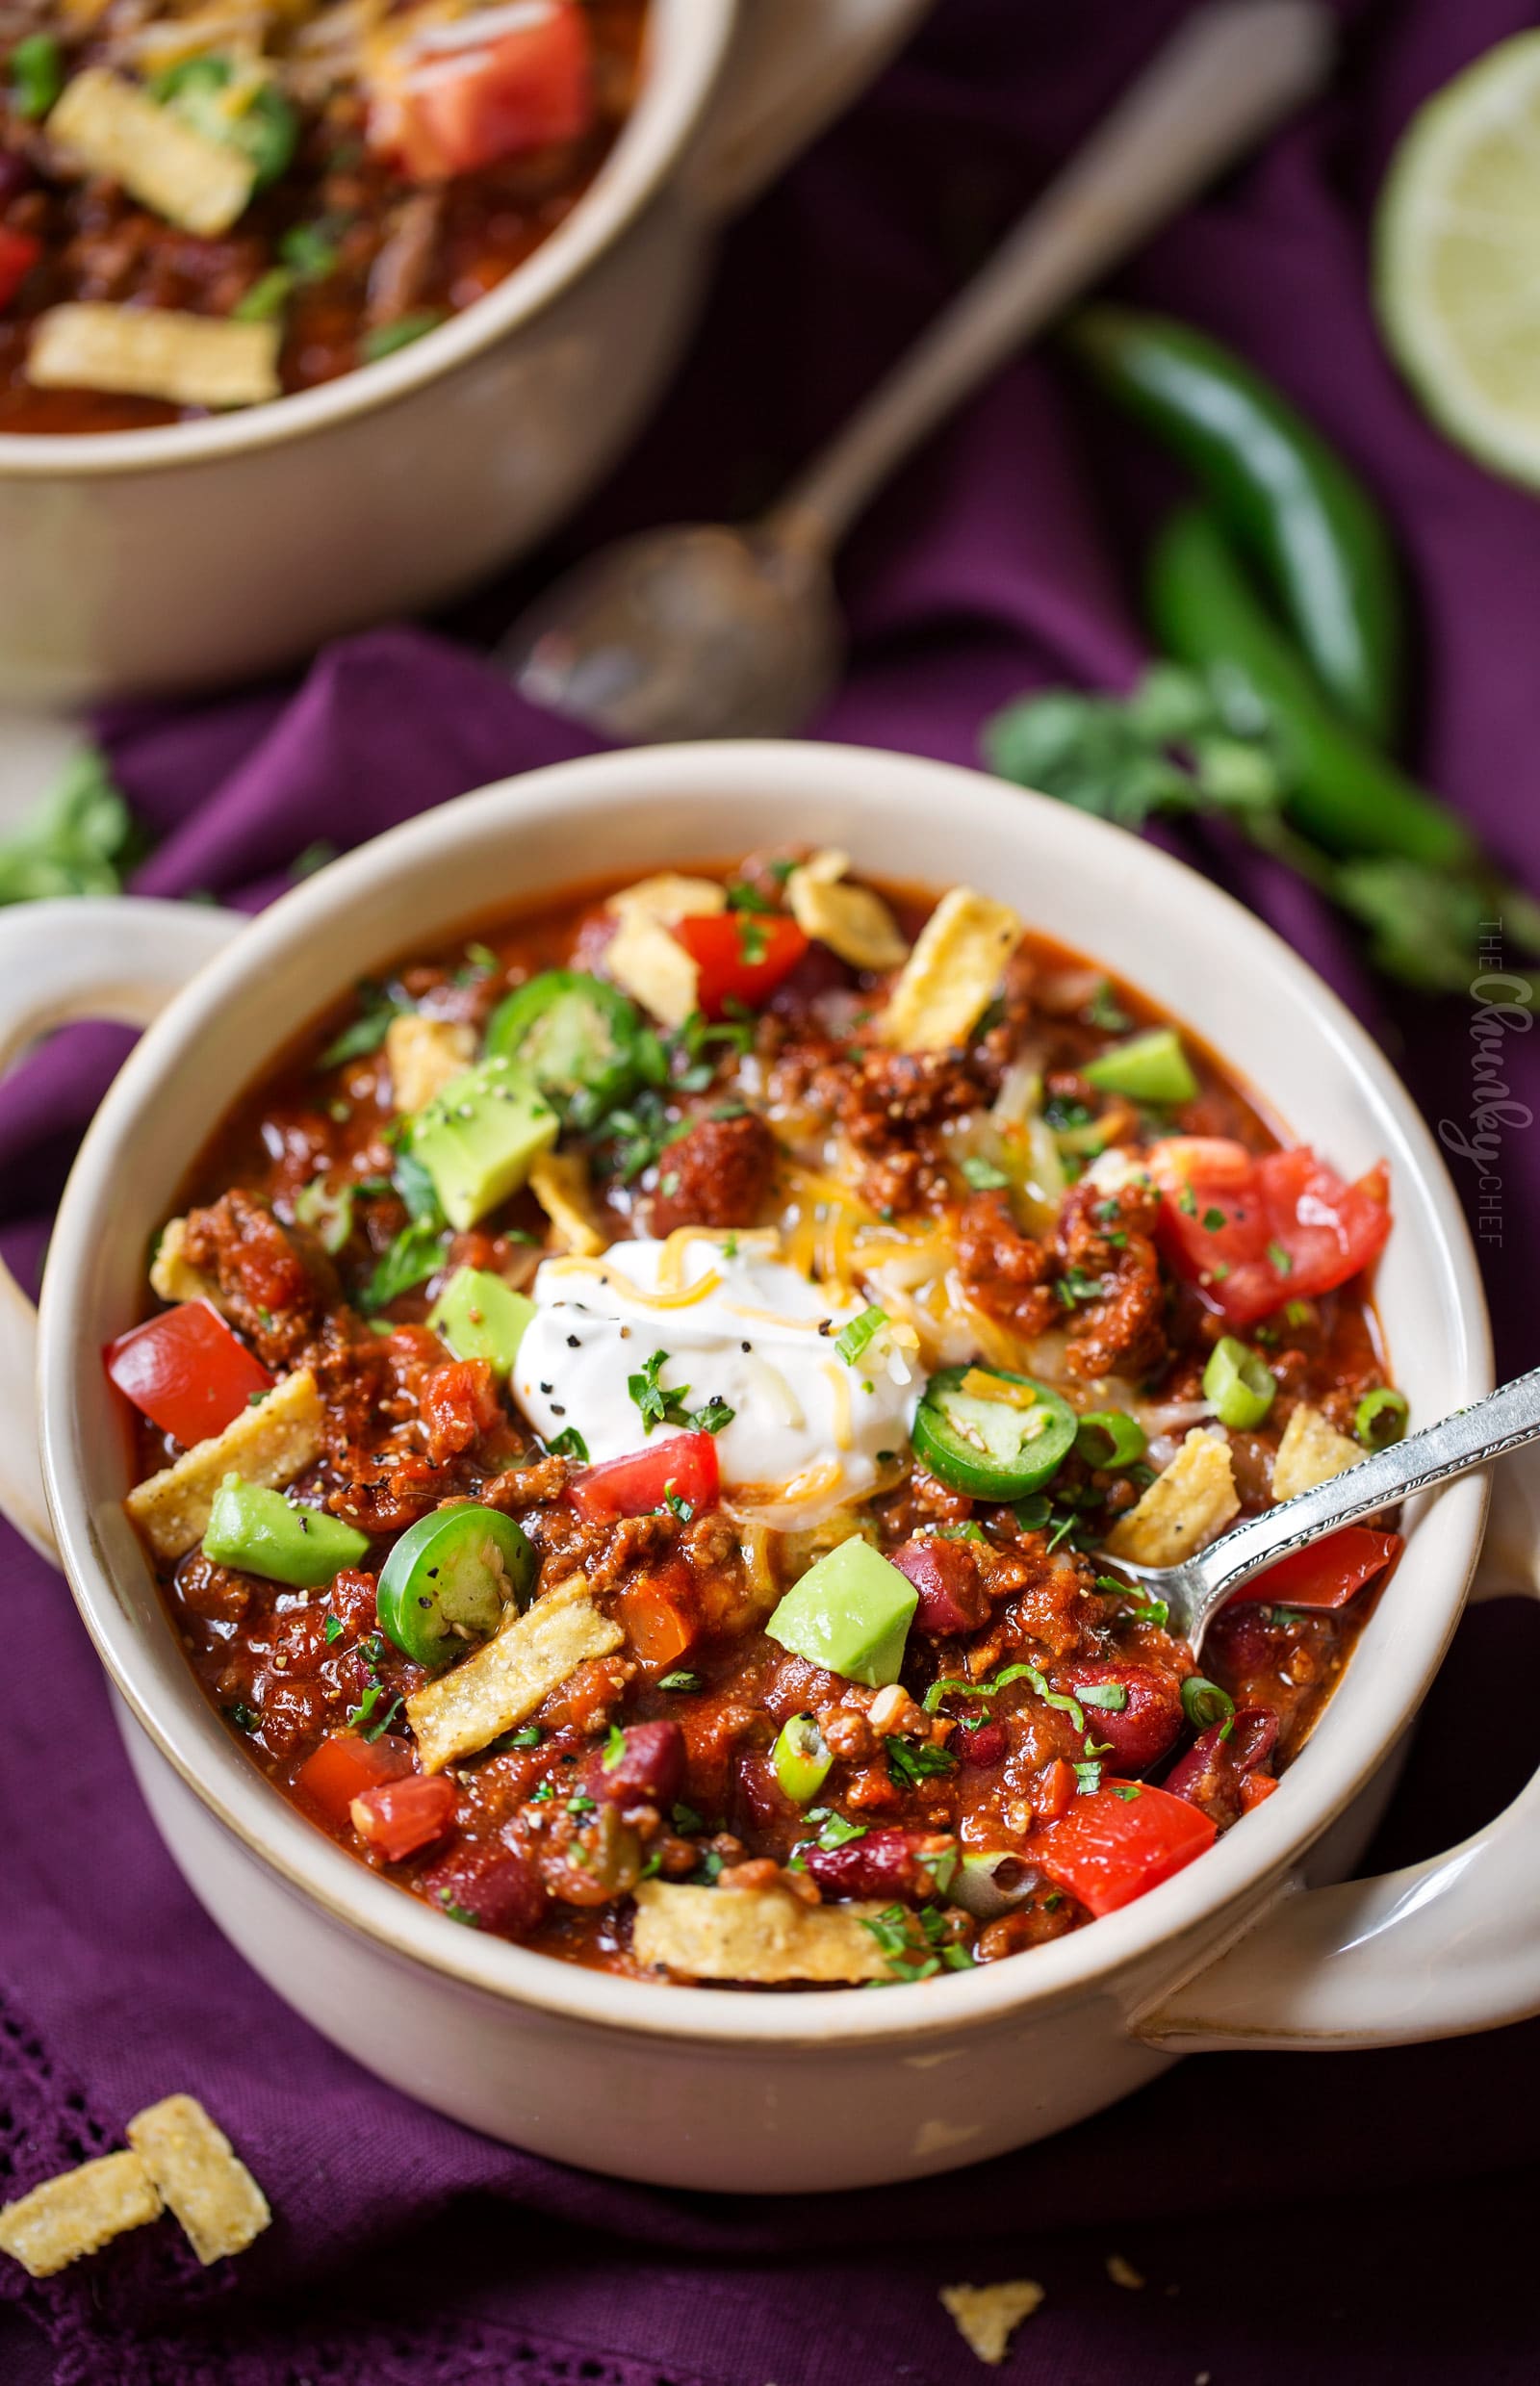 Classic Beef and Bean Slow Cooker Chili | Make classic beef and bean chili the easy way... in the slow cooker!  Come home to a big bowl of comfort food, or serve this chili at a game day party! | https://www.thechunkychef.com | #chili #slowcooker #crockpot #gameday 